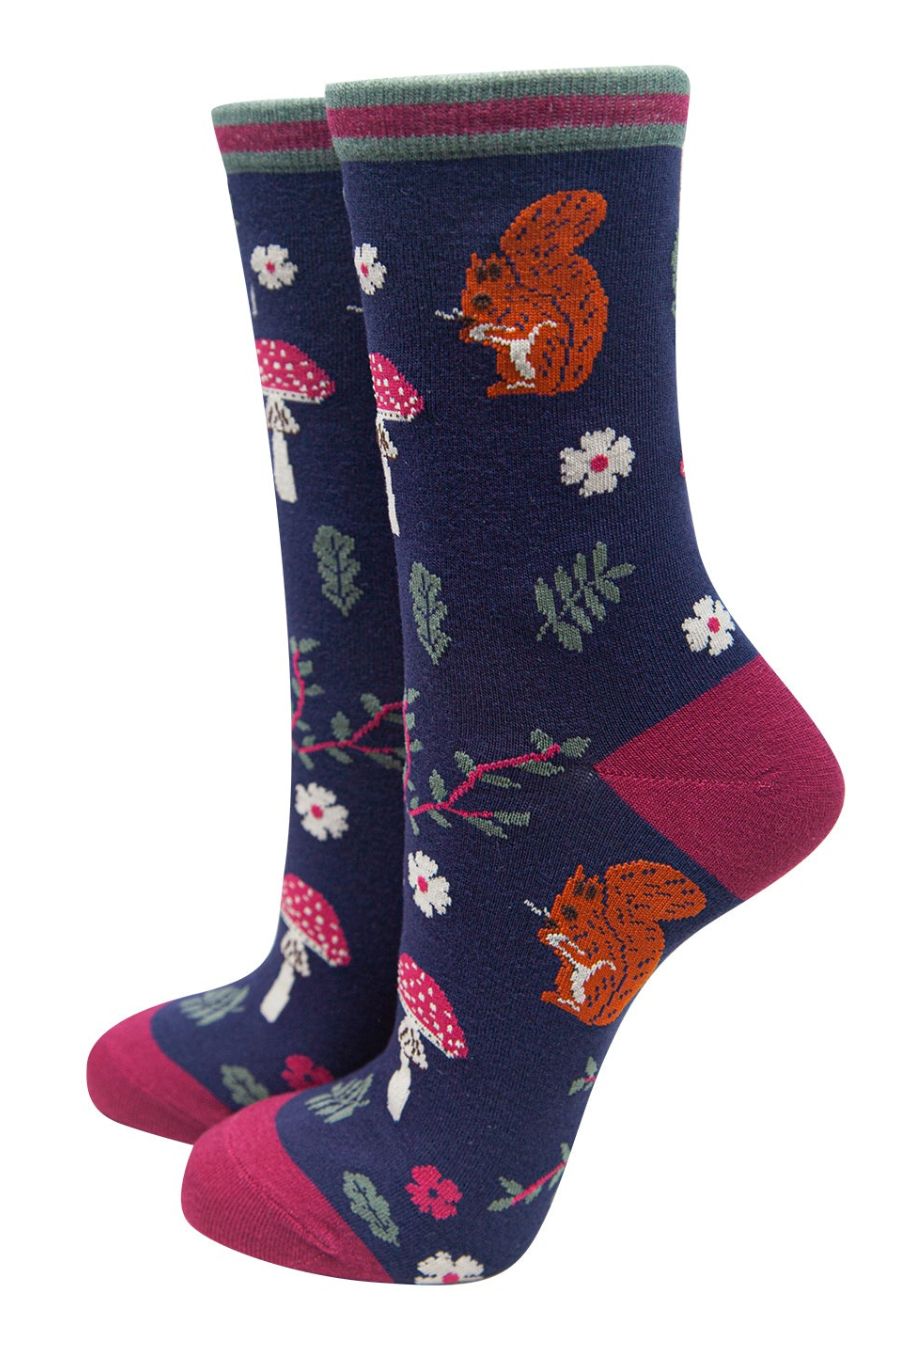 navy blue and pink bamboo ankle socks with red squirrels, toadstools and flowers